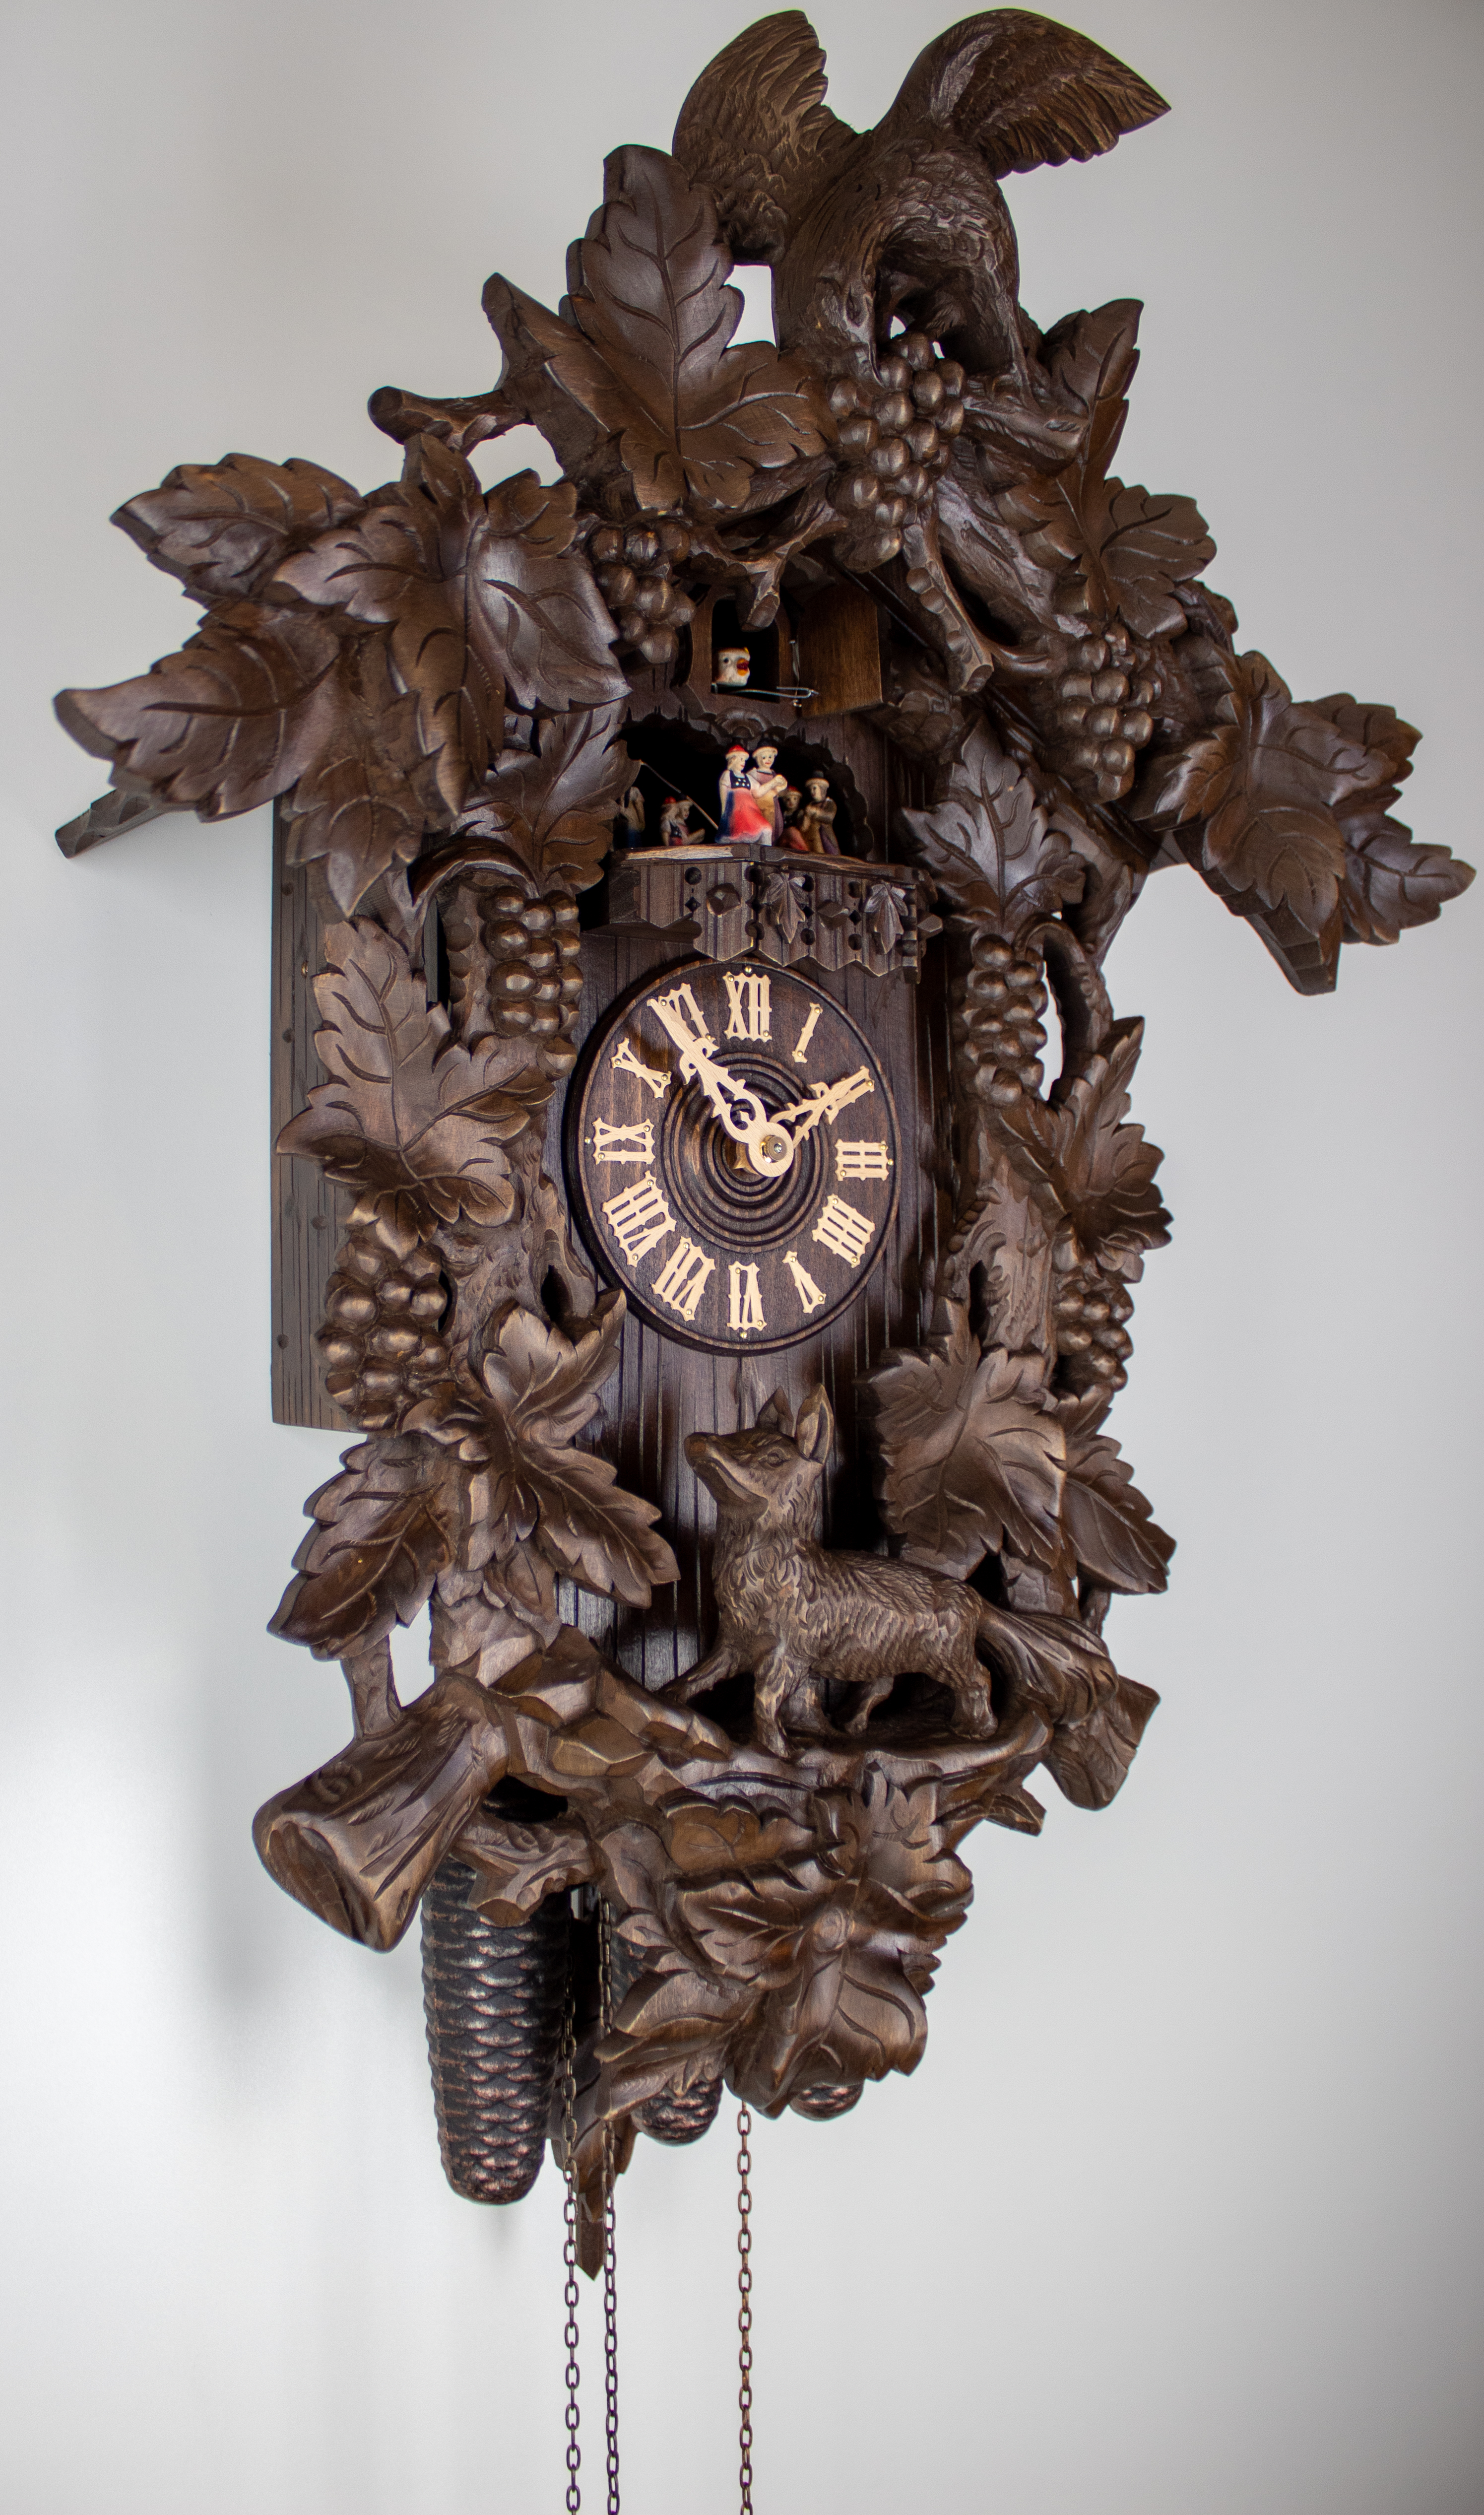 8 Days Music Dancer  Cuckoo Clock with fox and grapes